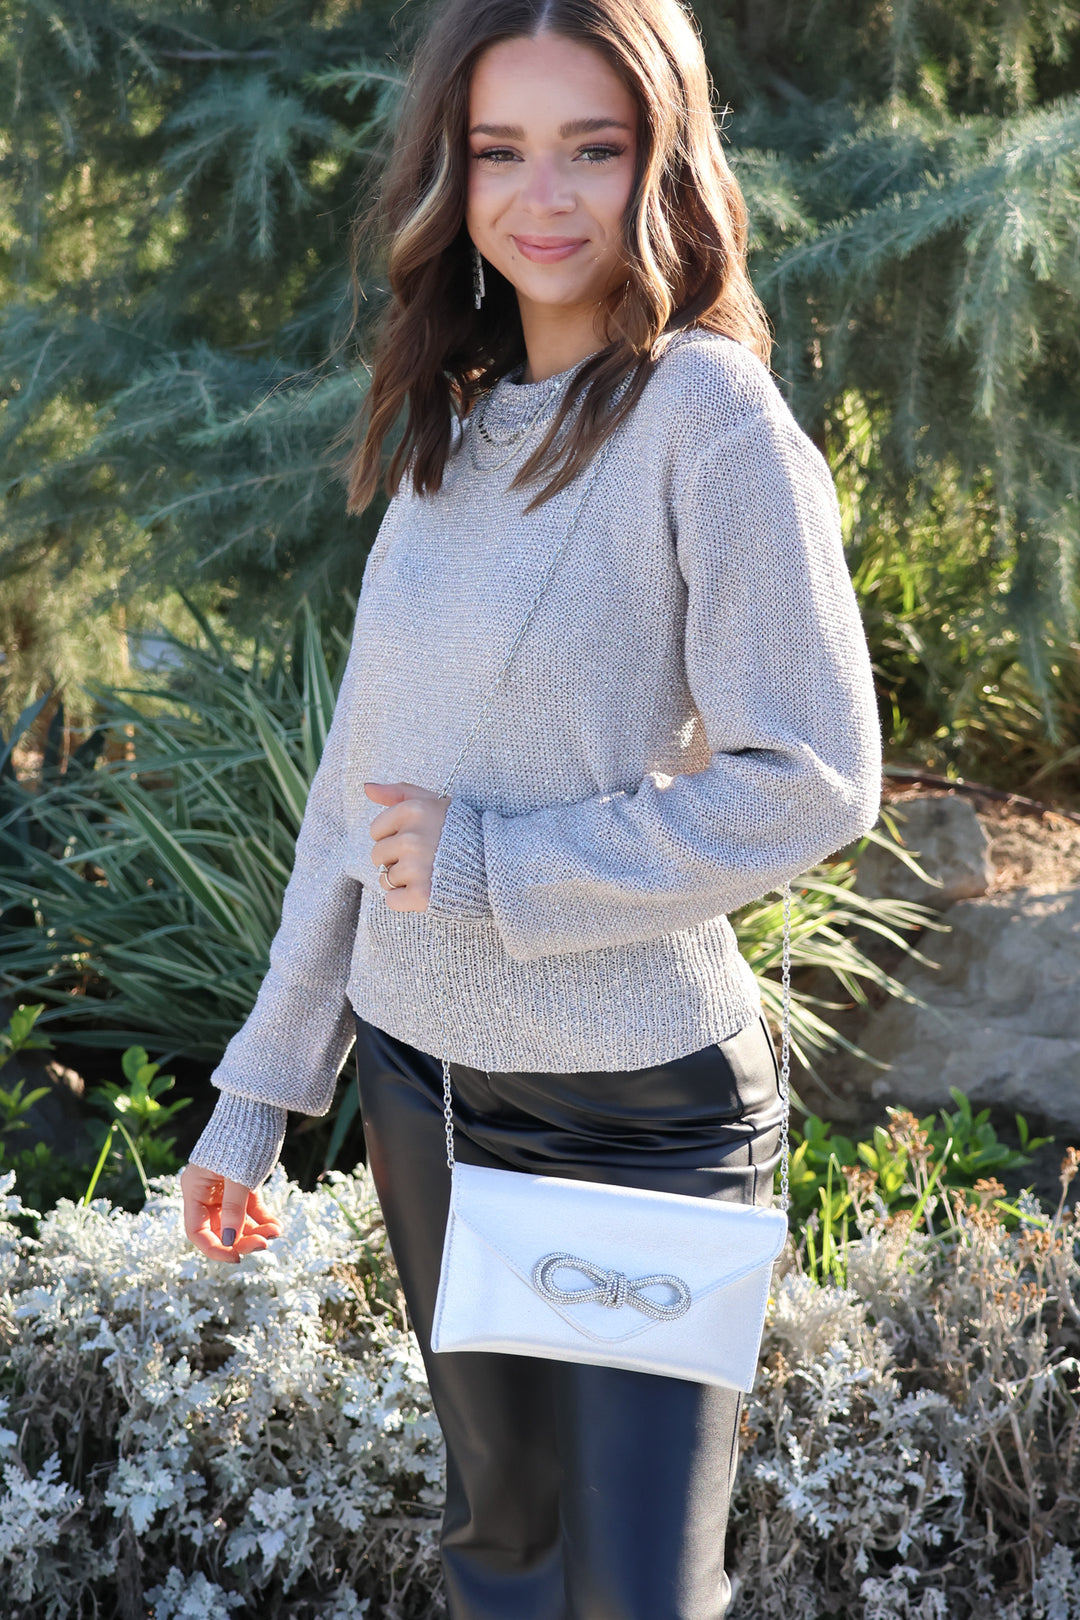 Lover Girl Clutch In Silver - ShopSpoiled